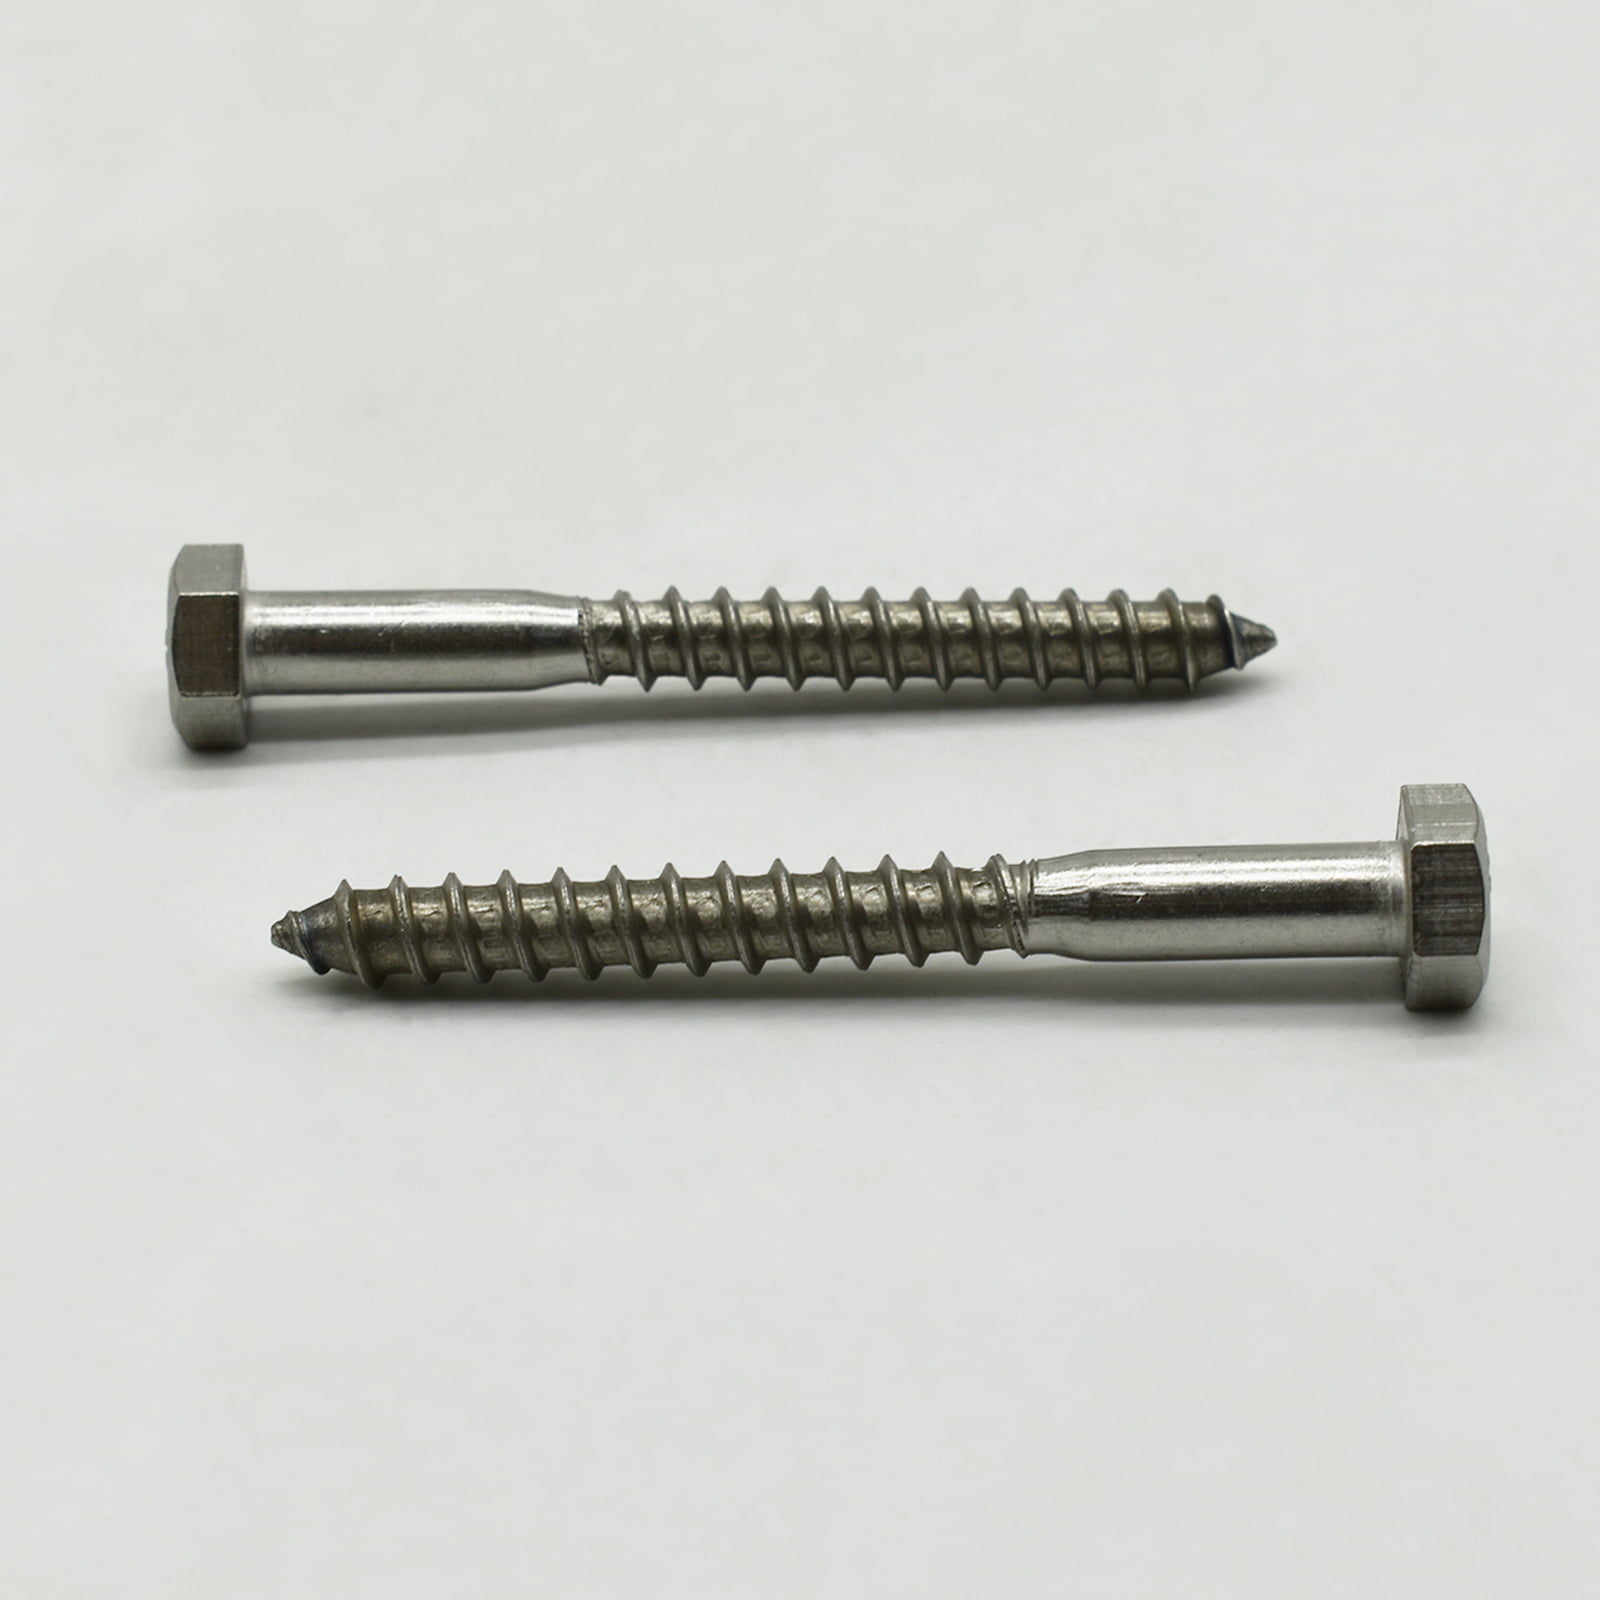 Durable and Sturdy 50 5/16-18x3/4 Stainless Steel Carriage Bolts Coarse Thread Round Head Screw Good Holding Power in Different Materials 